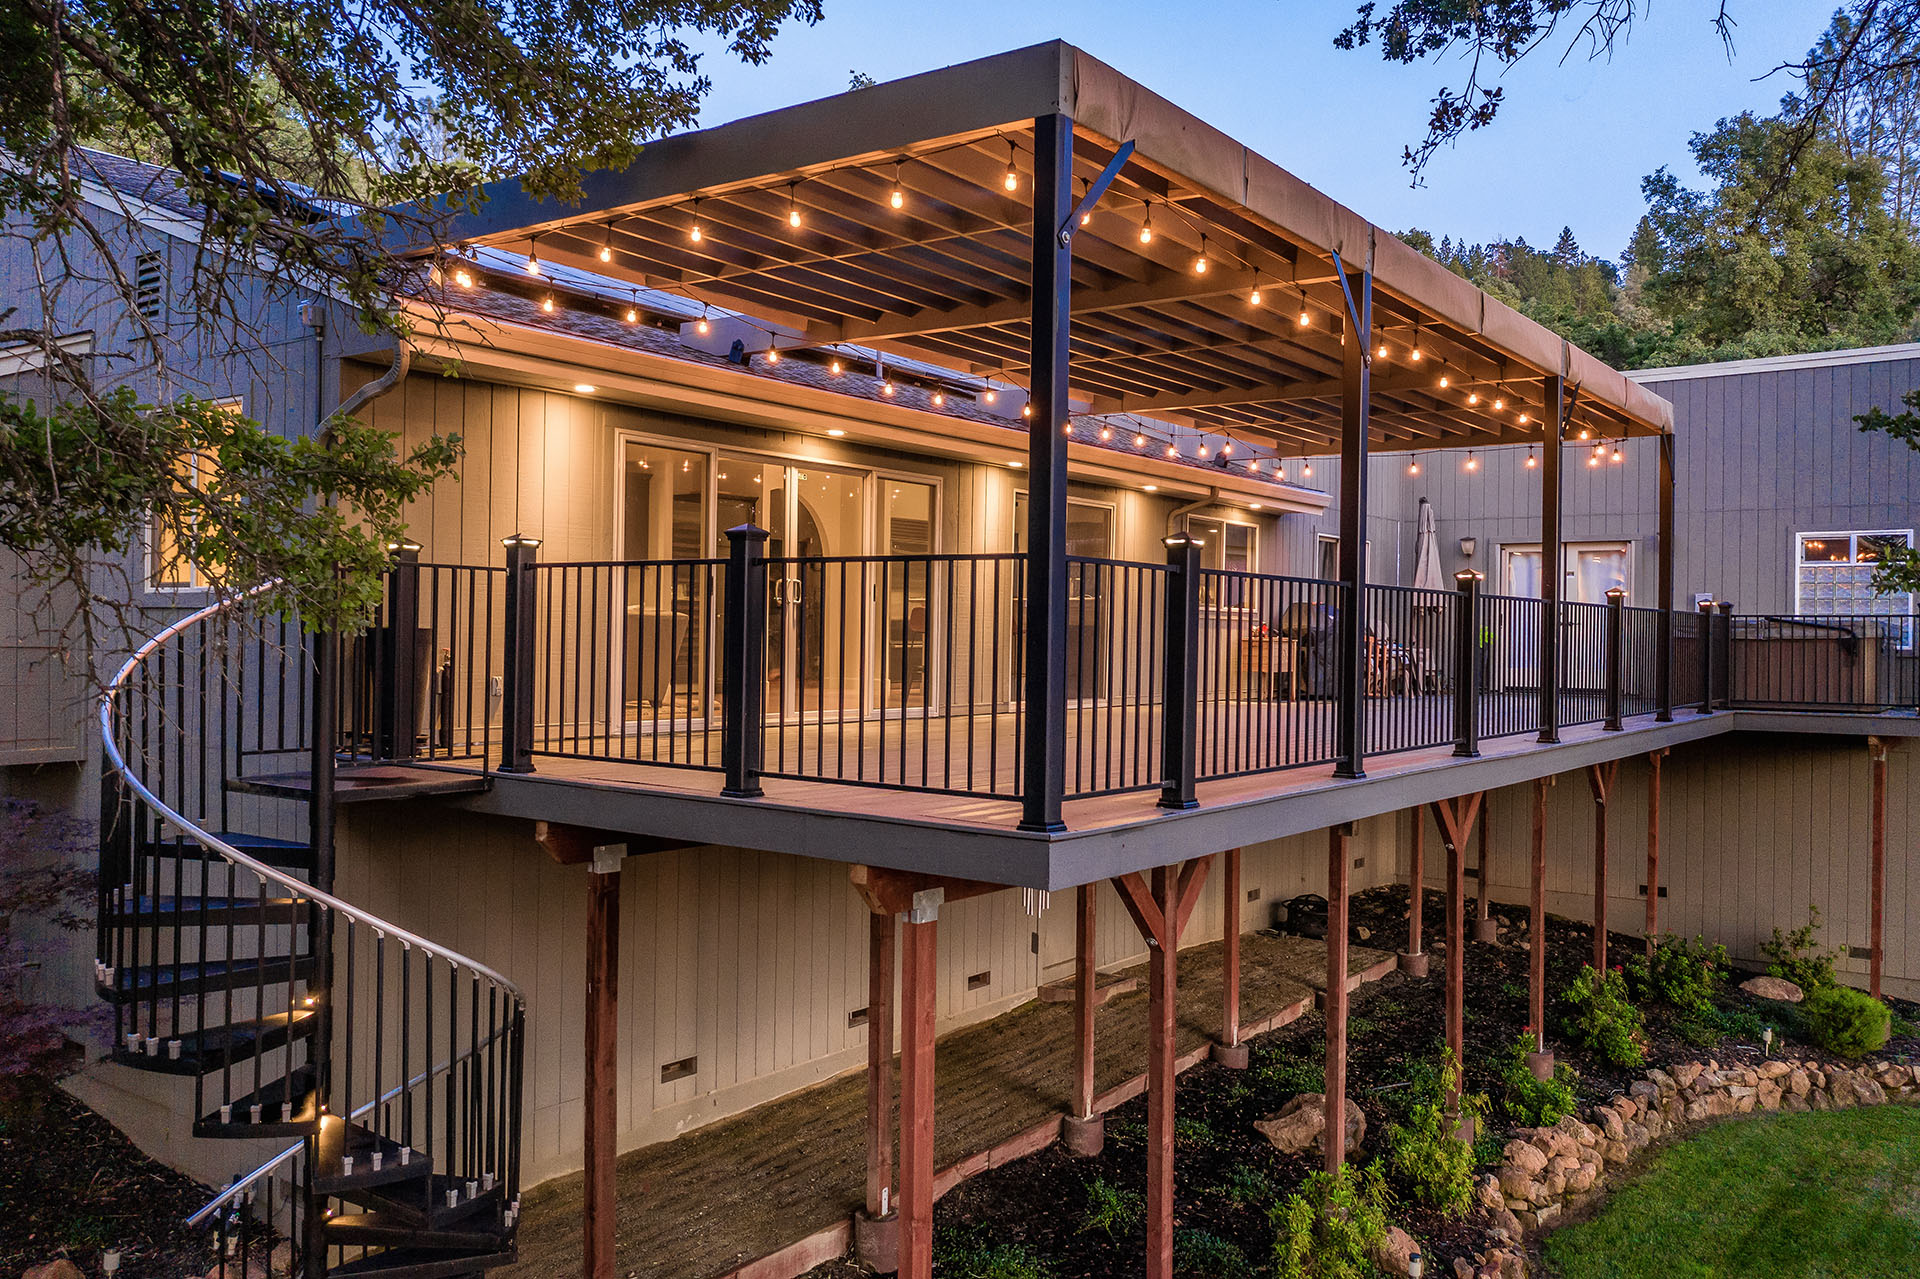 Outdoor patio with hanging string lights overhead with metal railings on the stairs leading to the floor below.